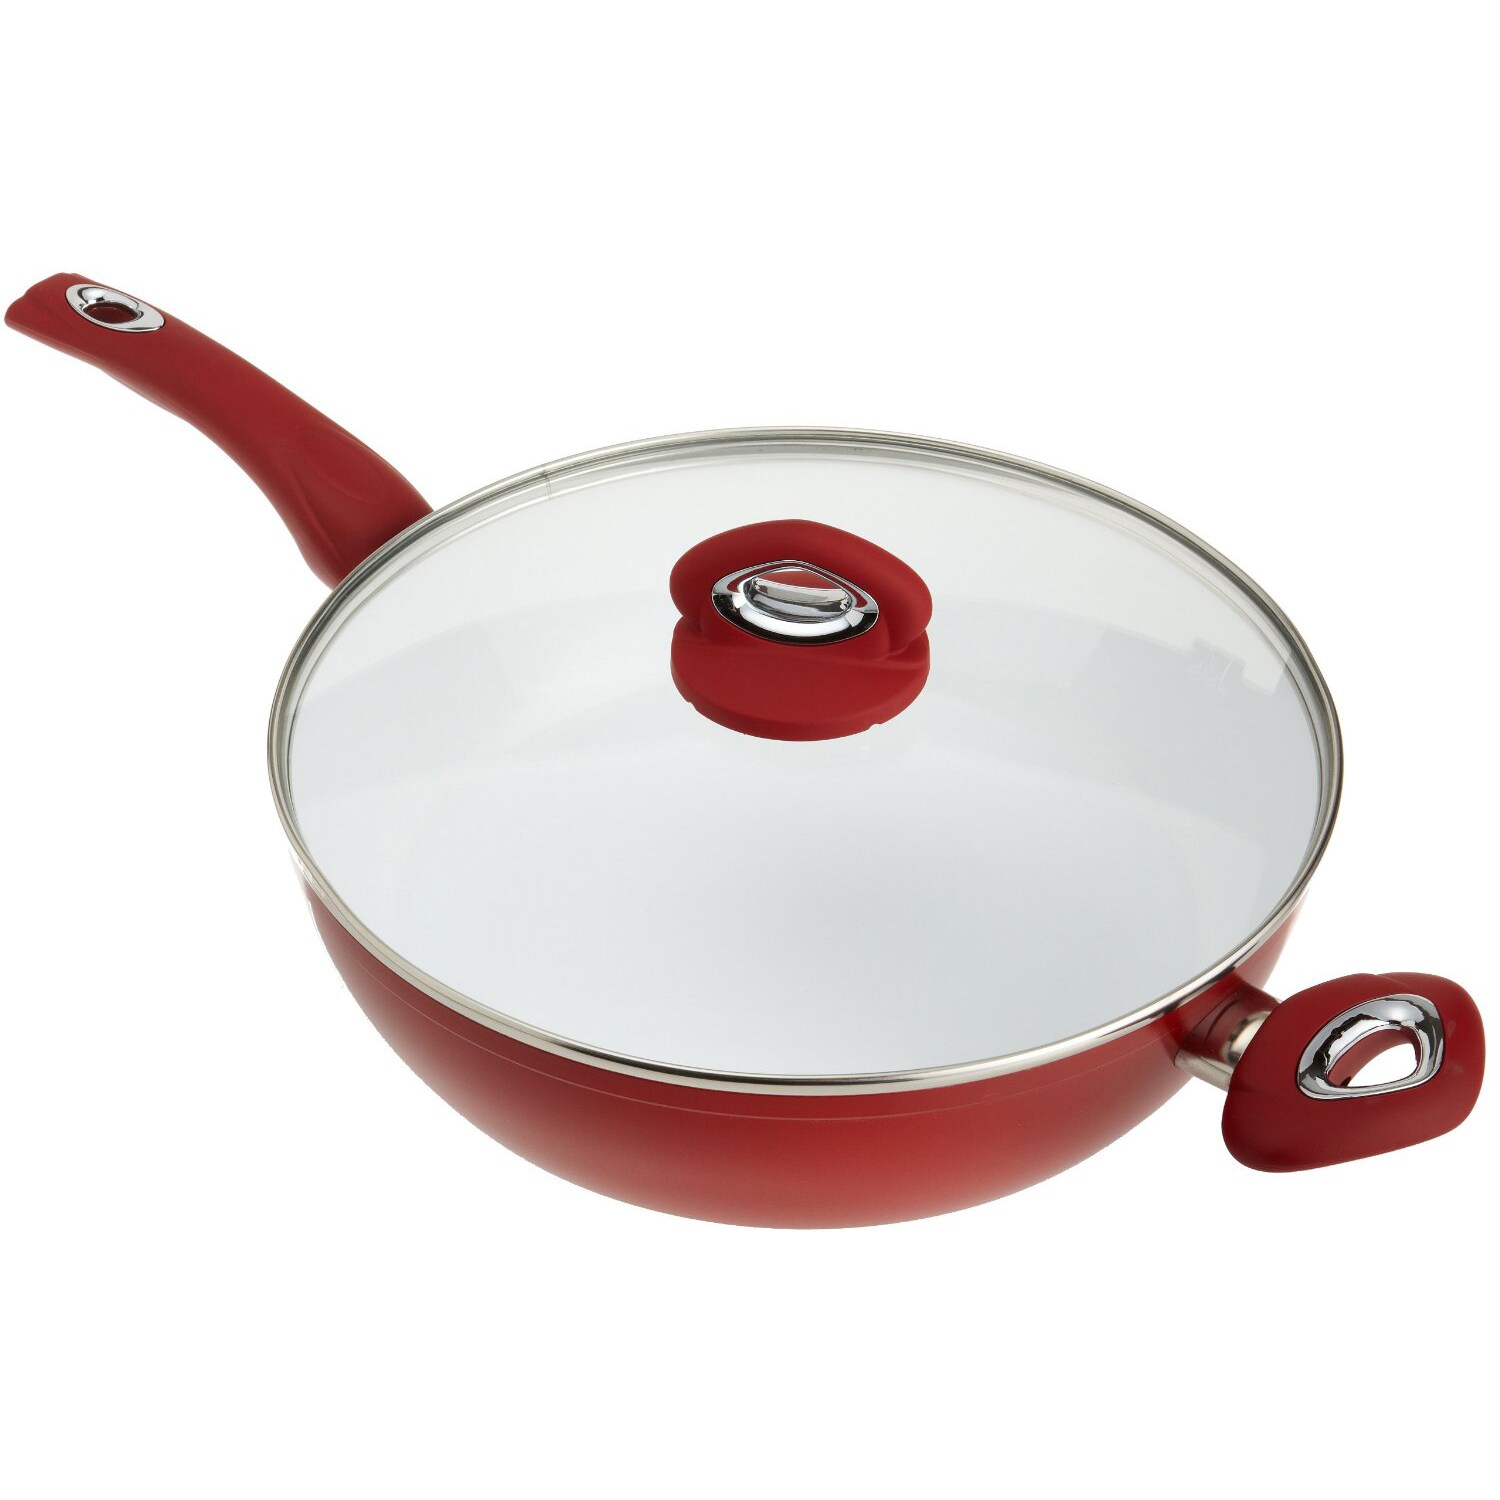 Shop Bialetti Aeternum 12 Inch Covered Deep Saute Pan Overstock 7539167,Low Sodium Soy Sauce Ingredients